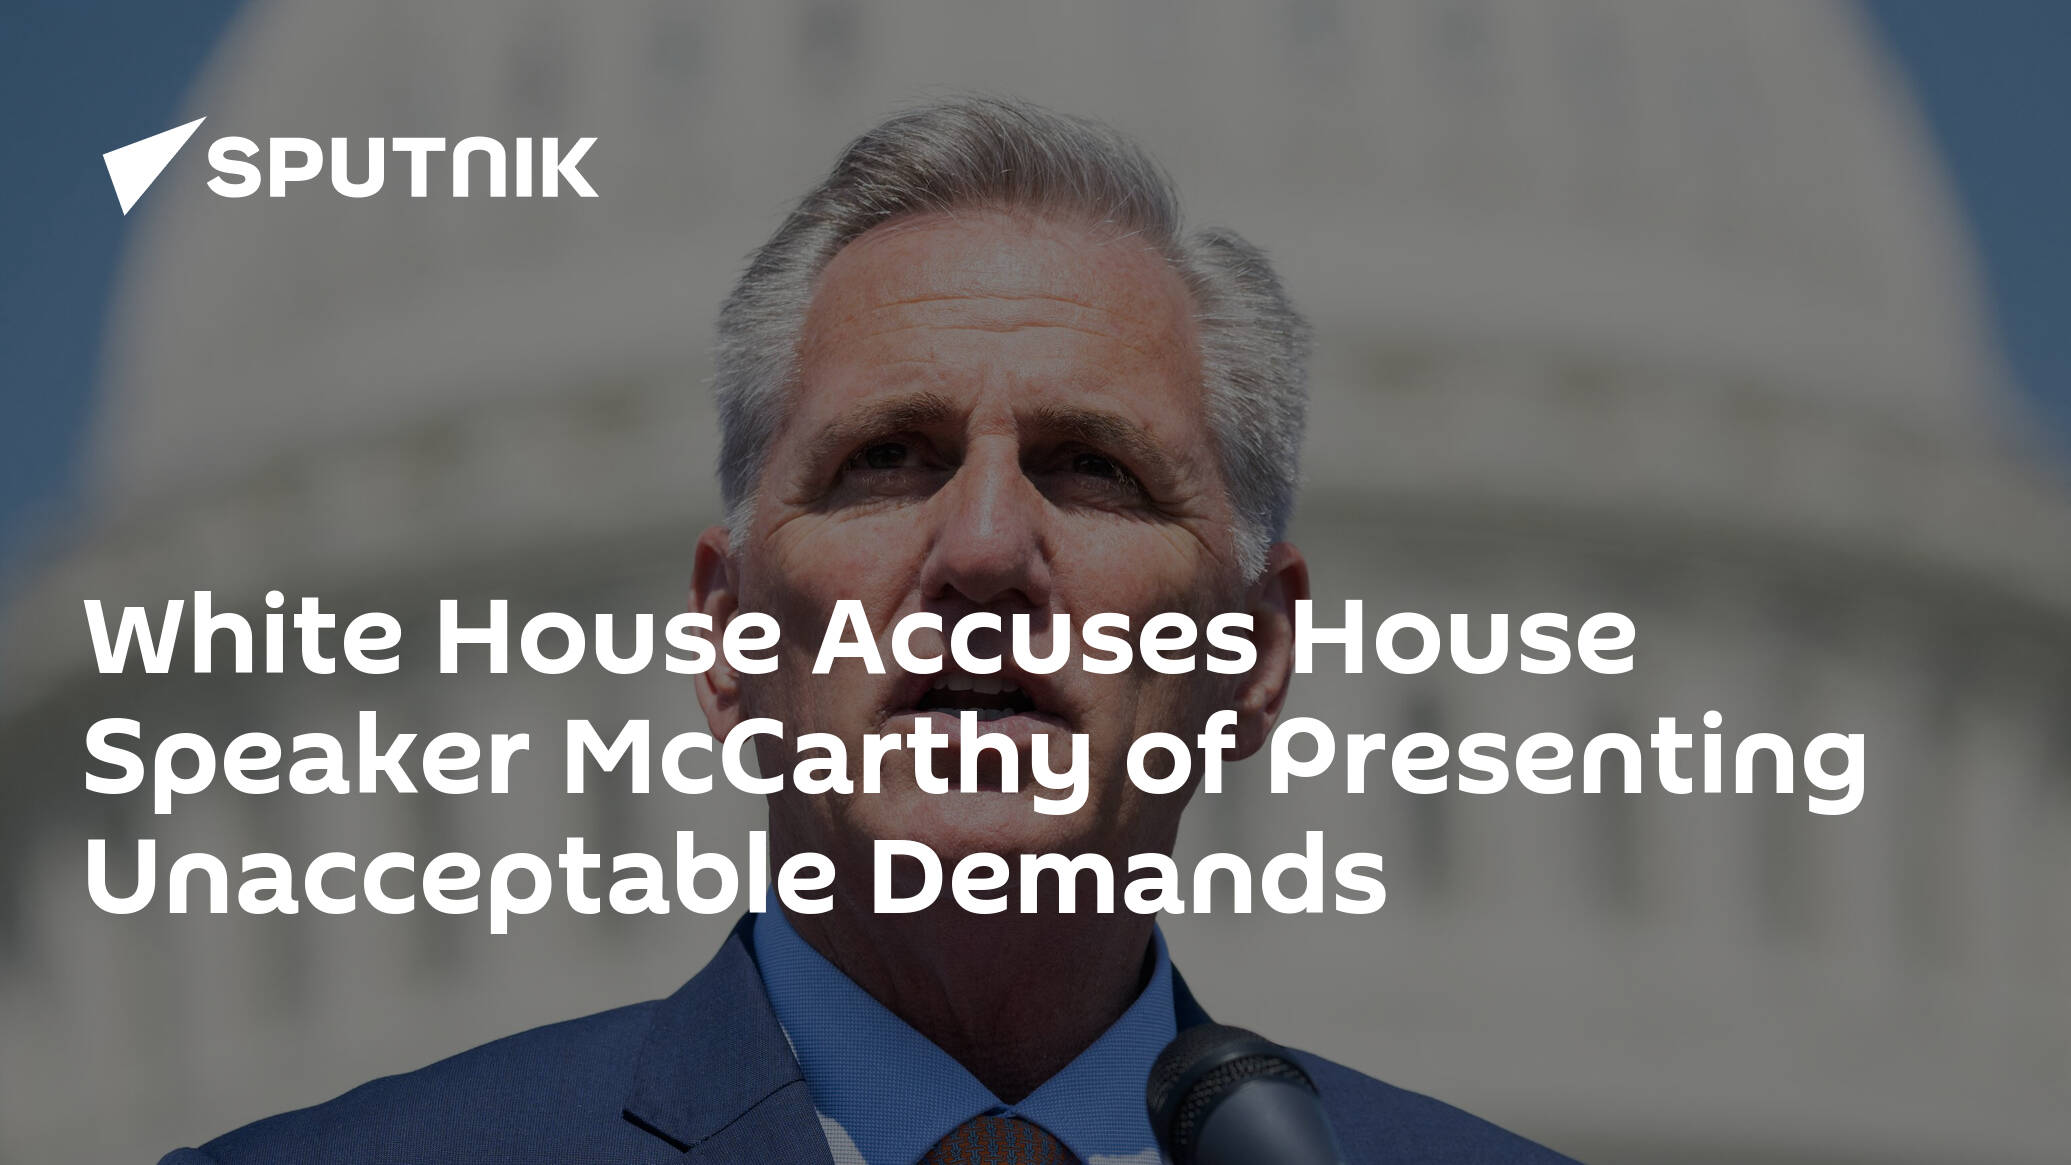 White House Accuses House Speaker McCarthy of Presenting Unacceptable Demands